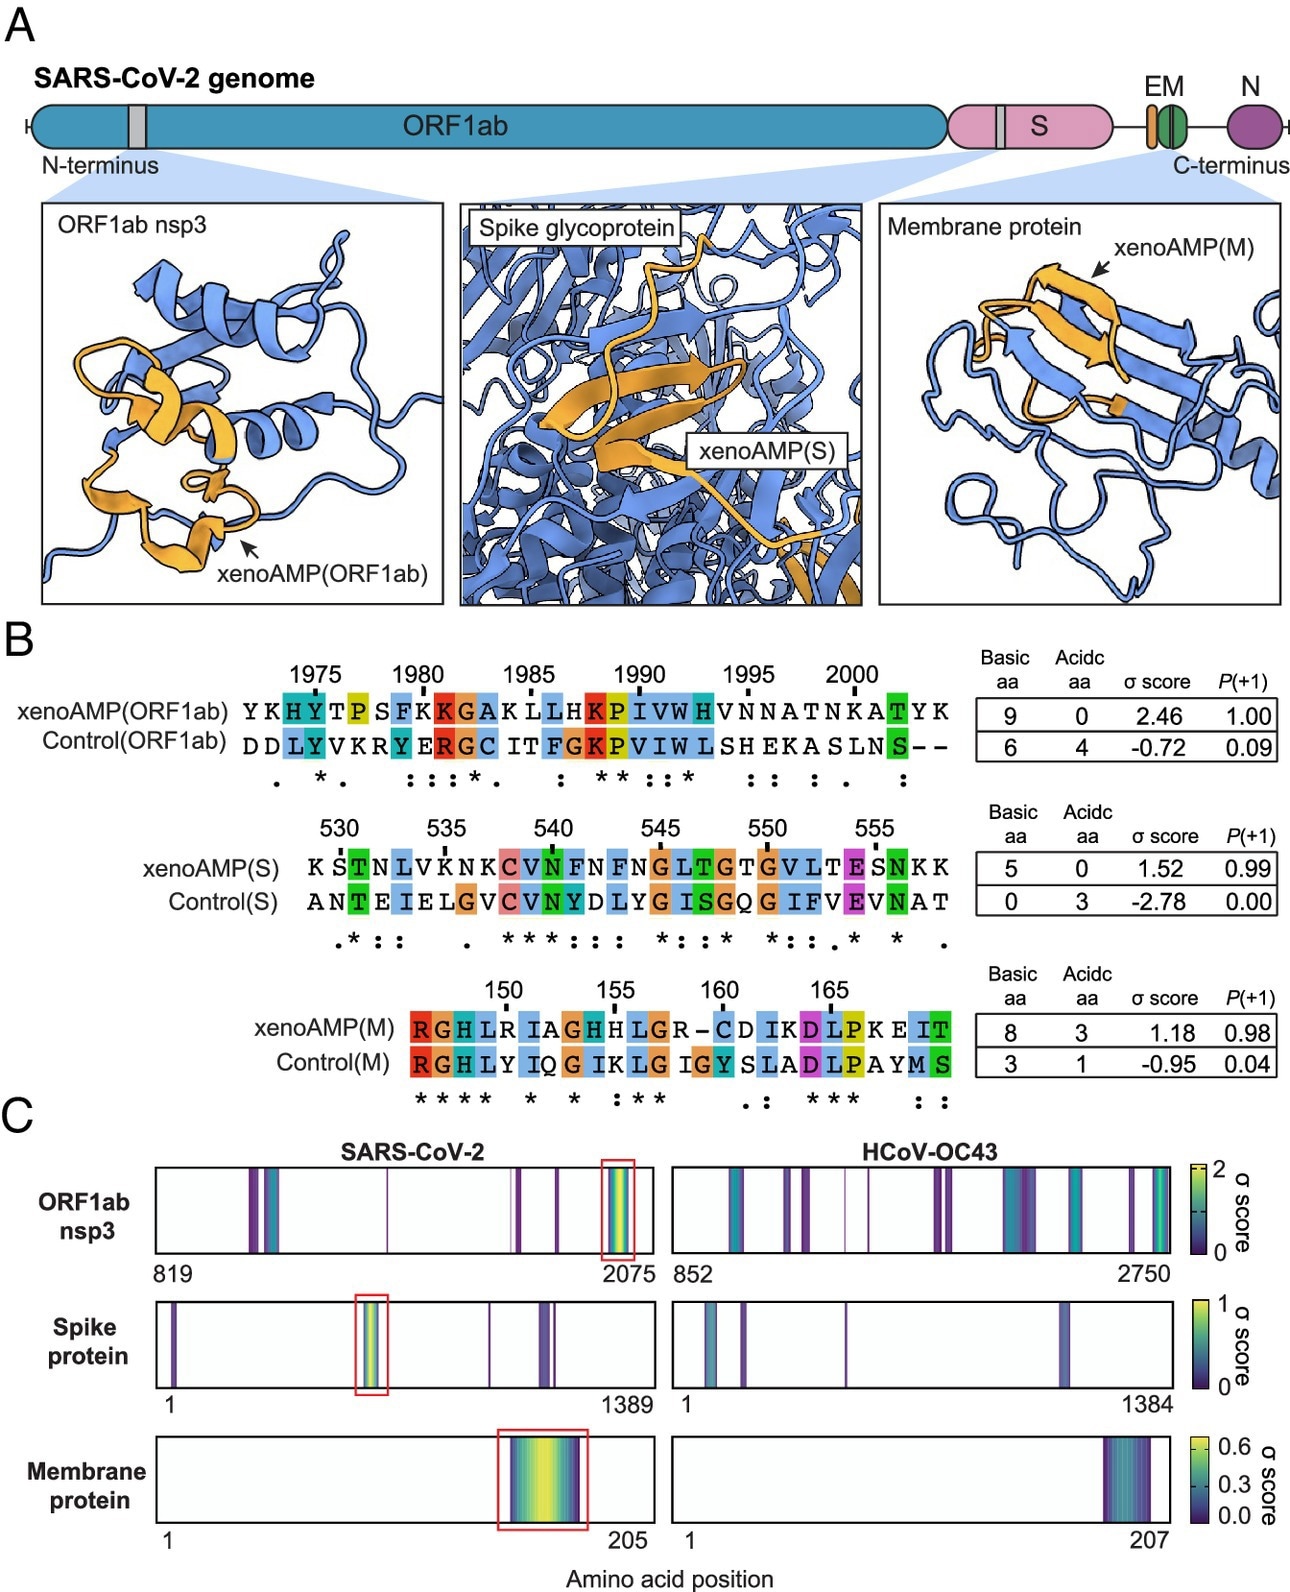 Existence of exogenous mimics of pro-inflammatory host antimicrobial peptides (xenoAMPs) in SARS-CoV-2 proteins.  (A) SARS-CoV-2 protein scanned with a machine-learning AMP classifier.  Each queried sequence is assigned a σ score that measures its AMP-ness.  Three representative high-scoring sequences are studied: xenoAMP(ORF1ab), xenoAMP(S), and xenoAMP(M).  Gray bars mark the location where corresponding sequences are selected  (B) SARS-CoV-2 sequences are aligned and compared to their homologues in a common cold human coronavirus HCoV-OC43: control (ORF1ab), control(S), and control(M).  Asterisks, colons, and periods indicate positions that are fully conserved residues, that have strongly similar properties, and that have weakly similar properties, respectively.  Colors are assigned to each residue using the ClustalX scheme.  (C) σ score heatmaps comparing the distribution of high-scoring sequences in three proteins from SARS-CoV-2 and HCoV-OC43.  The first amino acid of each sequence is colored according to its average σ score;  Regions with negative mean σ scores (non-AMP) are colored white.  of high-scoring sequences for SARS-CoV-2 